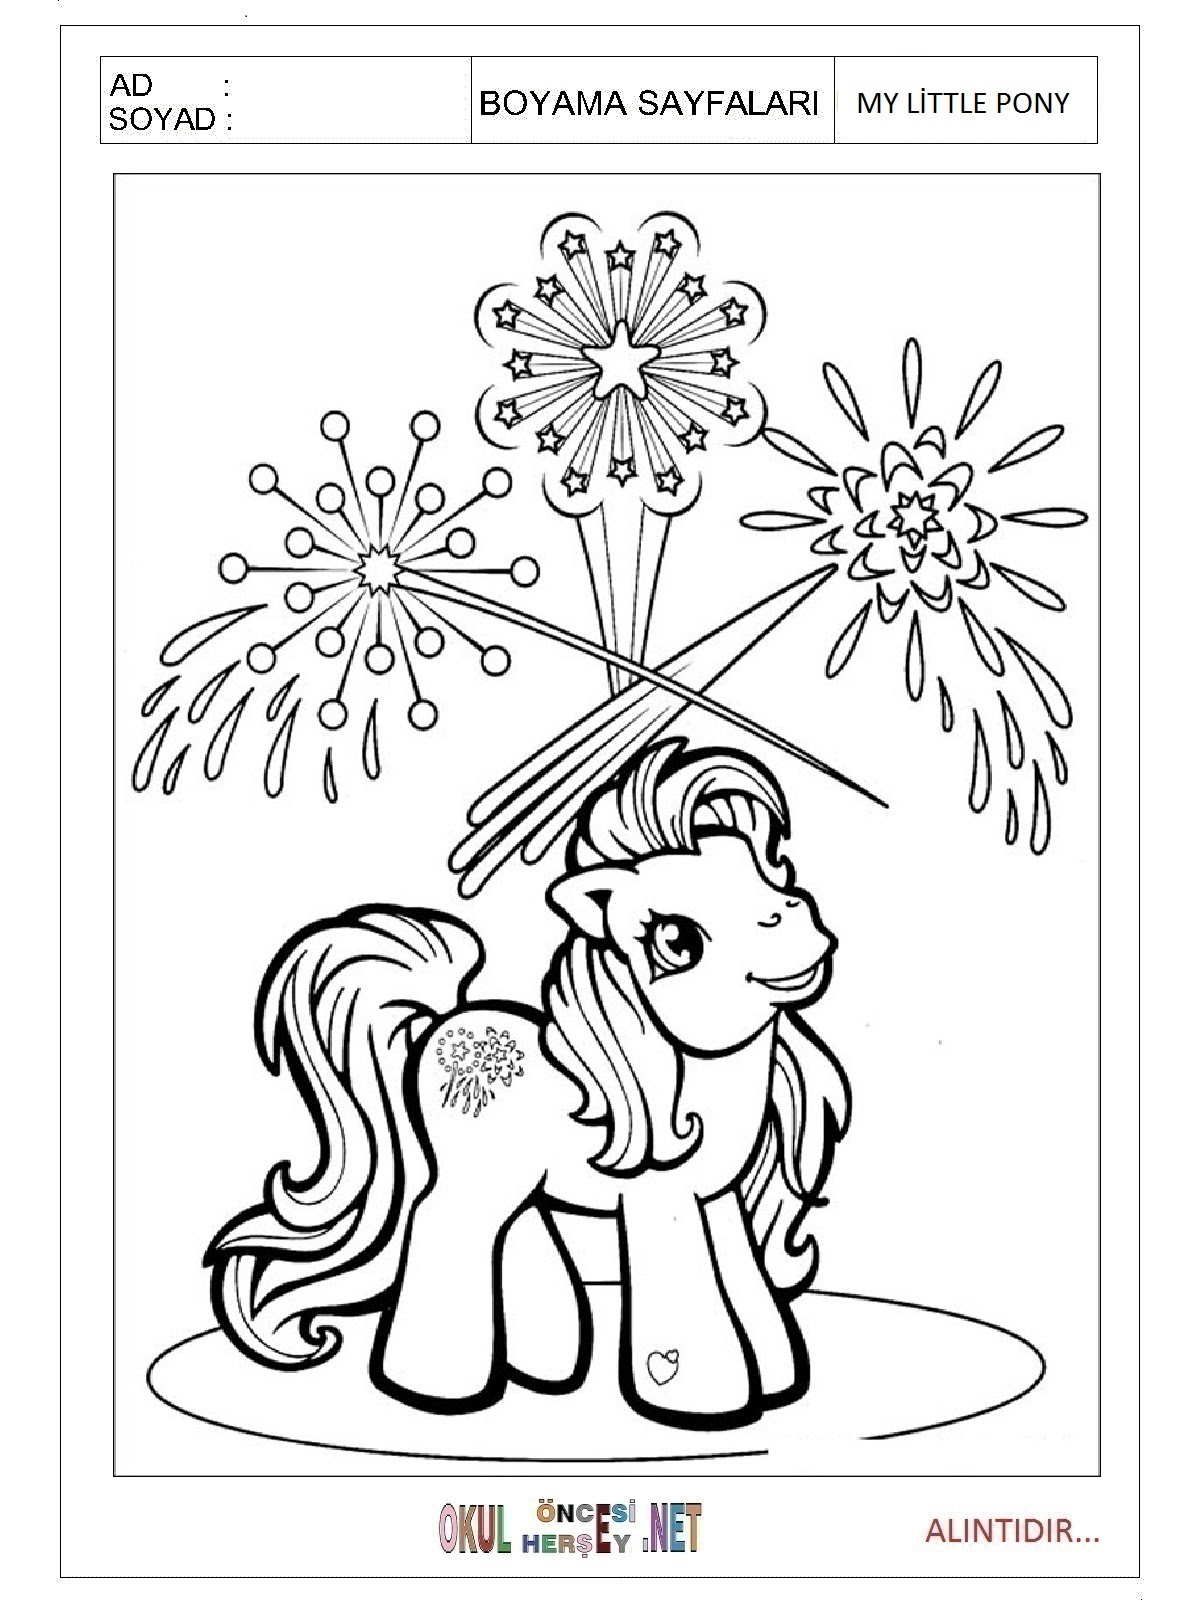 My Little Pony Coloring Rainbow Dash Clipart Rainbow My Little Pony Boyama 900x900 Png Download Pngkit